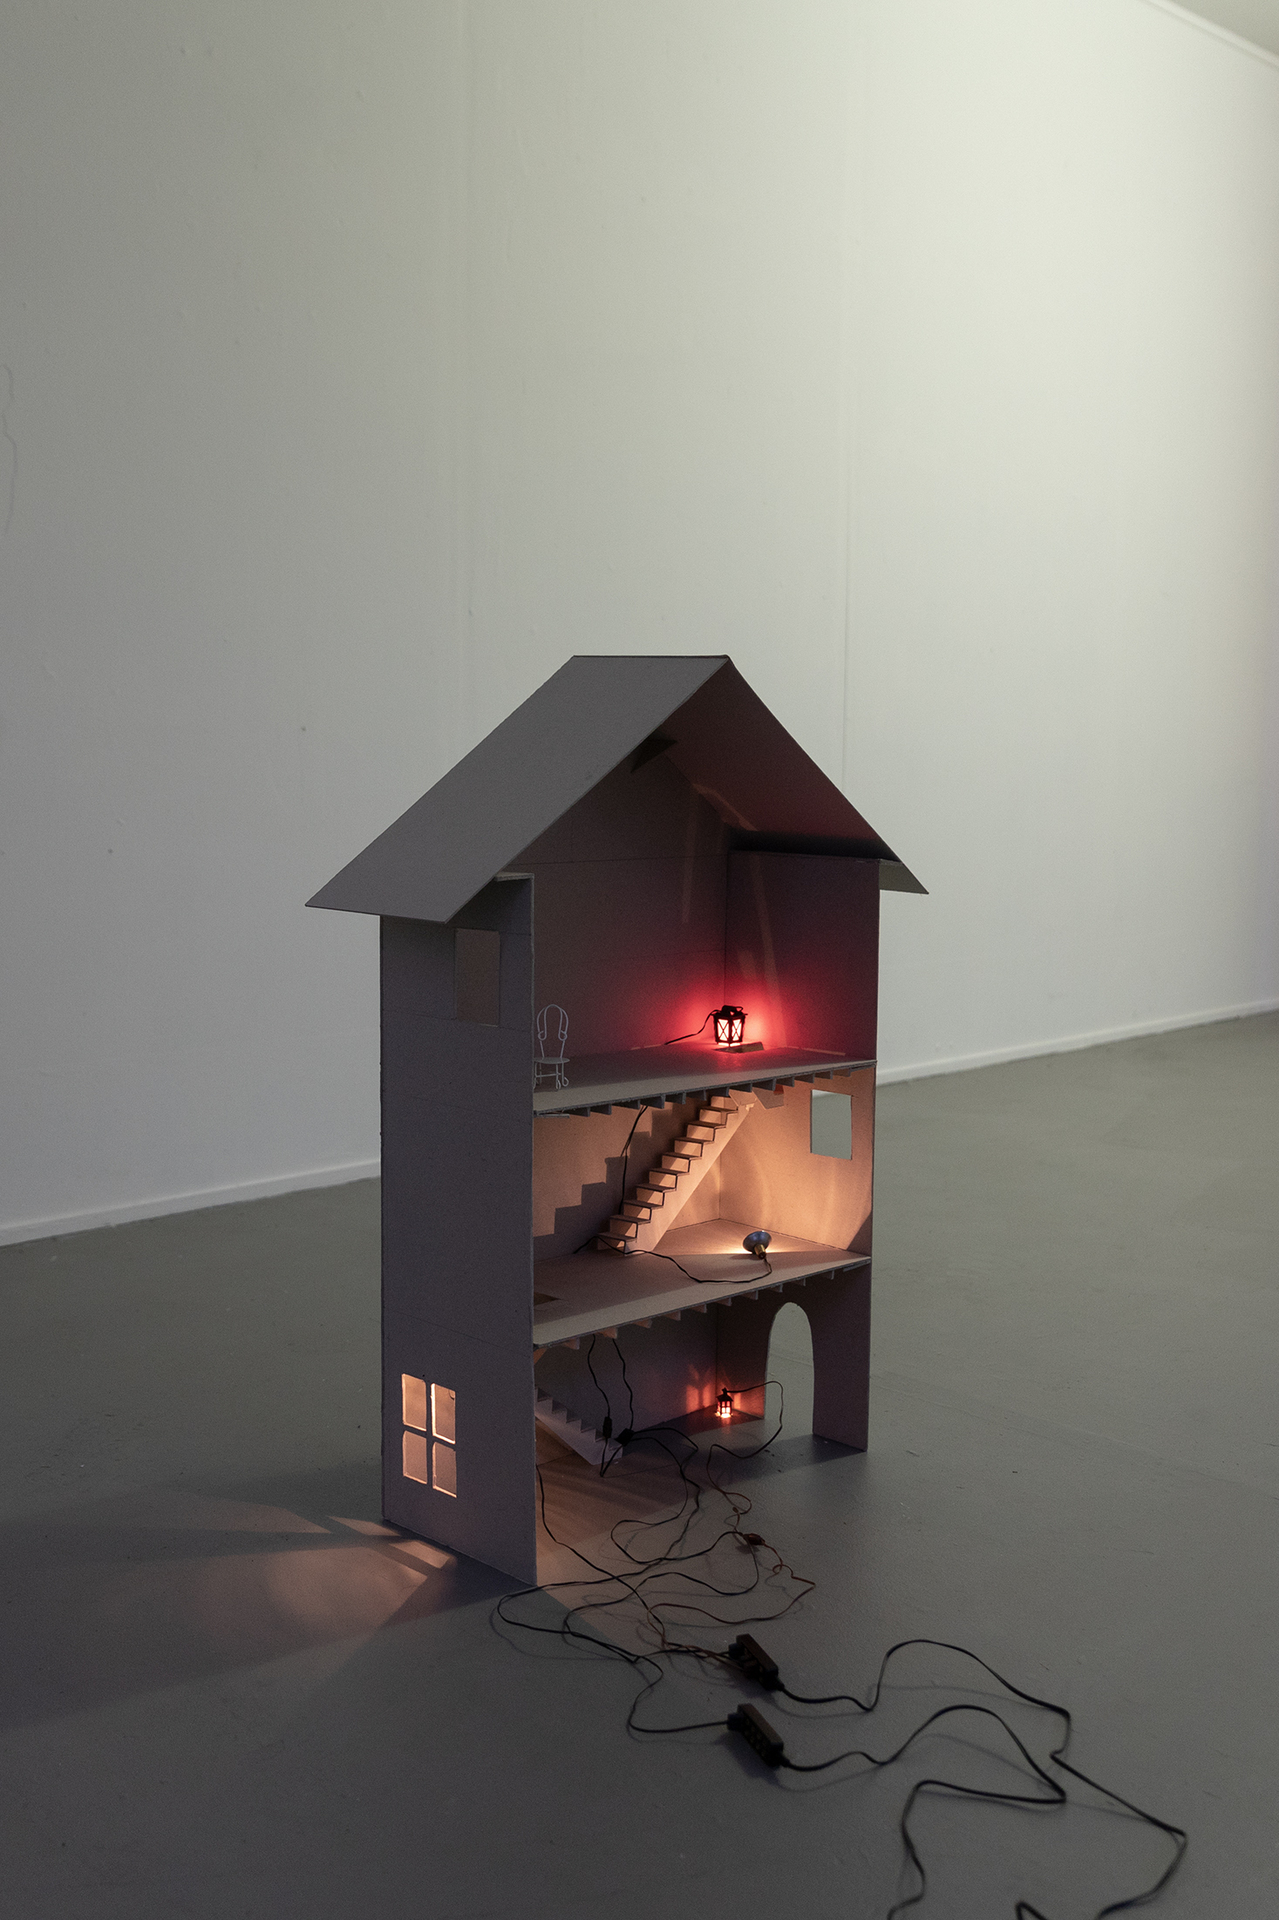 Giovanna Belossi & Francesco De Bernardi, Where it all happens Those tender moments Under this roof, 2020, cardboard, glue, lights, electronic elements, toy chair, 90x66x20 cm